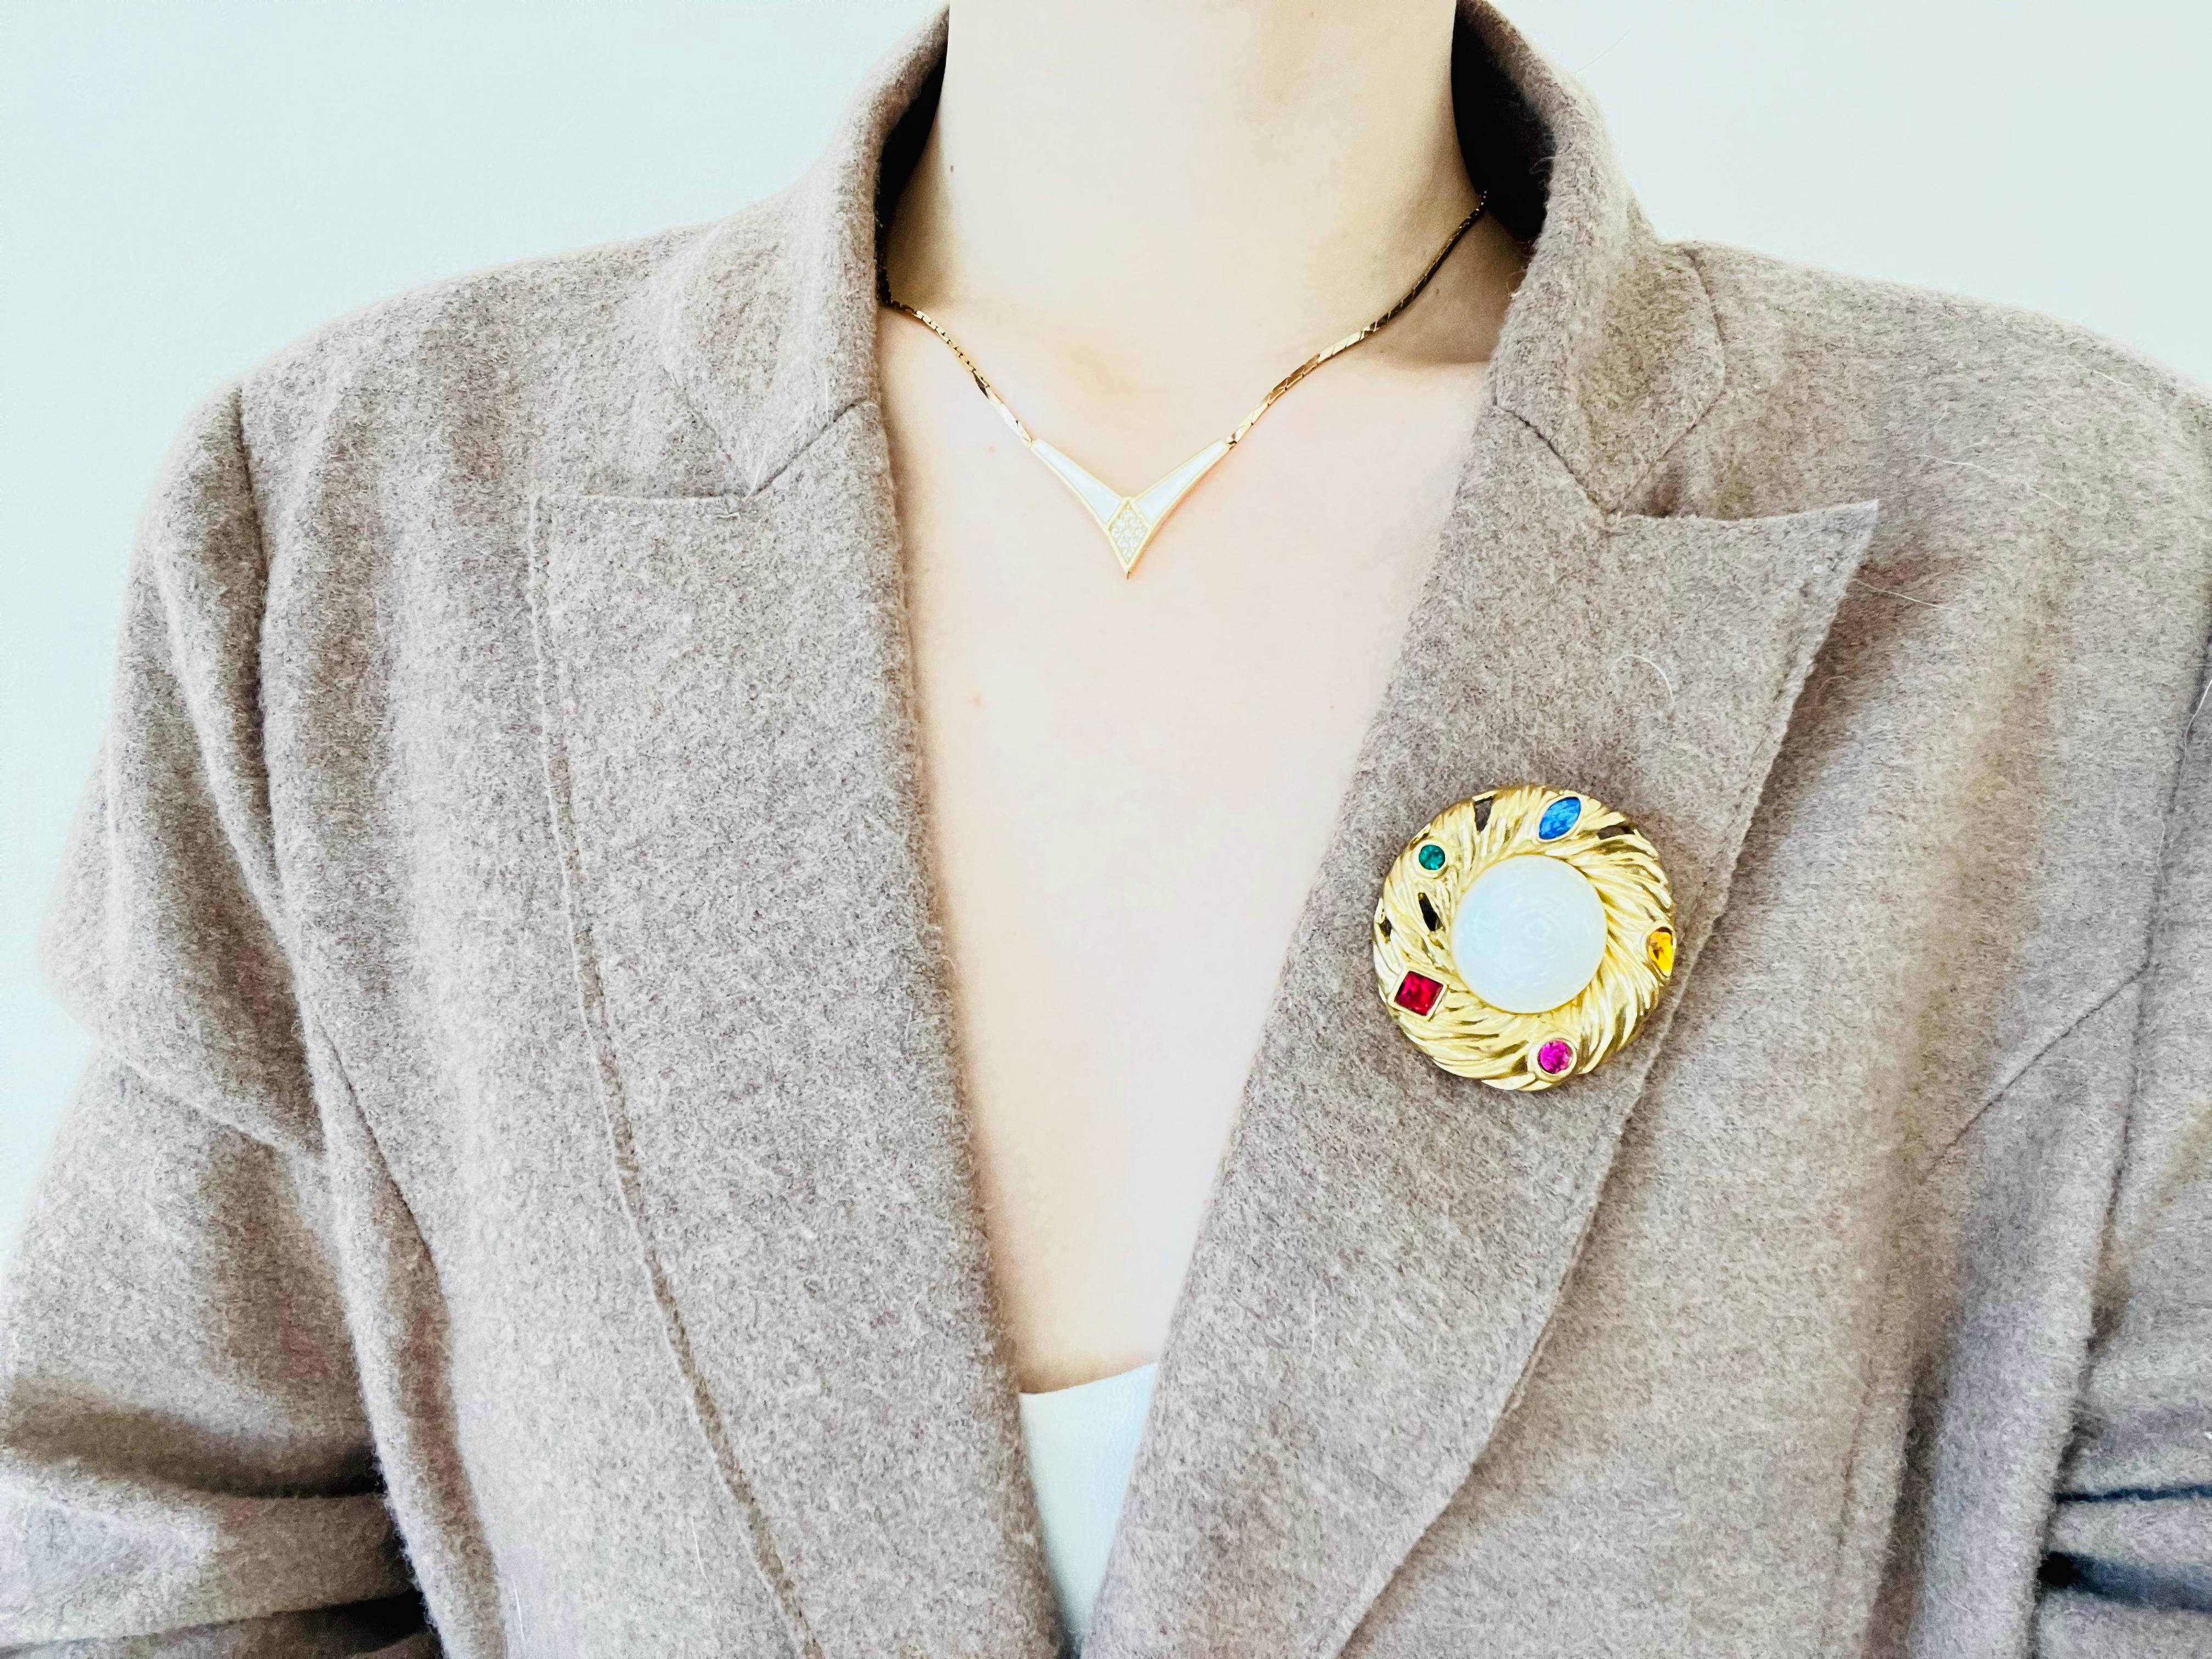 ysl brooch outfit